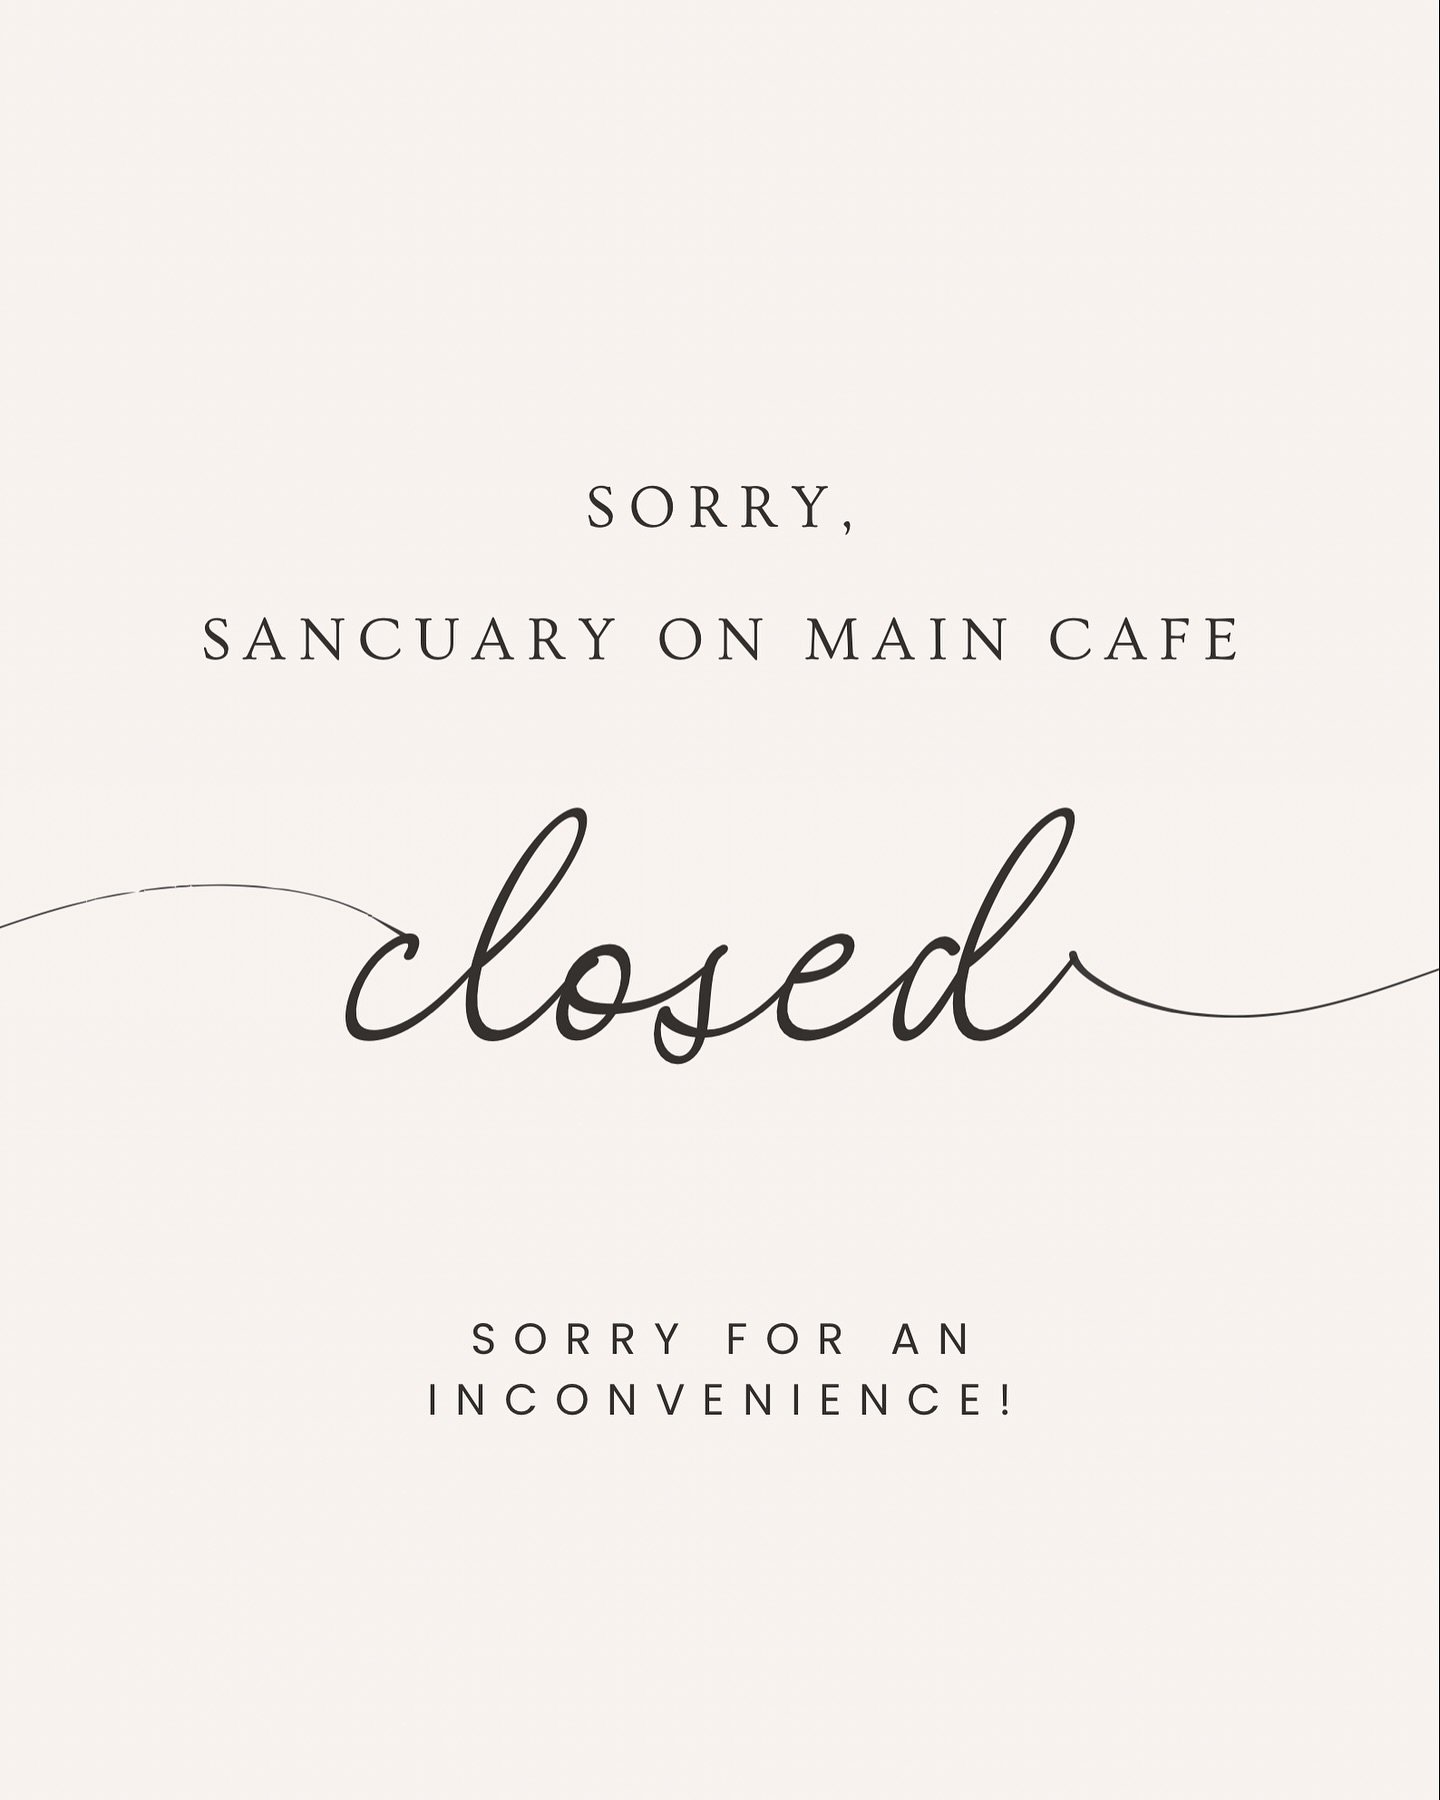 The cafe will be closing early today for unexpected maintenance. We are so sorry for any inconvenience 🤍